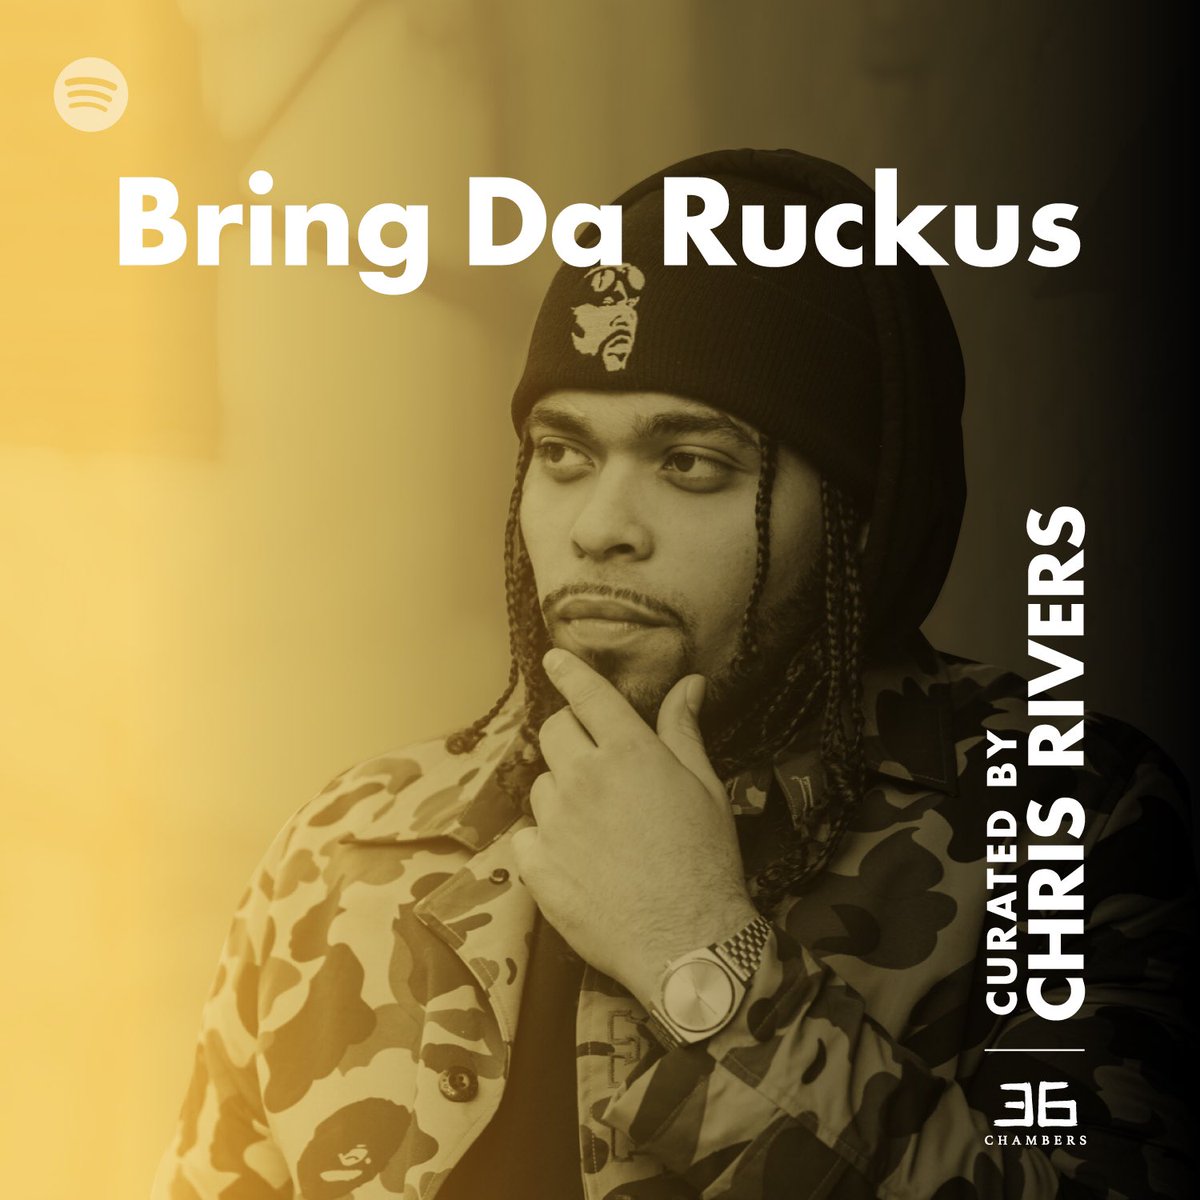 I teamed up with @36ChambersALC to curate their Bring Da Ruckus Spotify playlist this week. Take a trip throughout hip hop history: 36chambersalc.com/ruckus